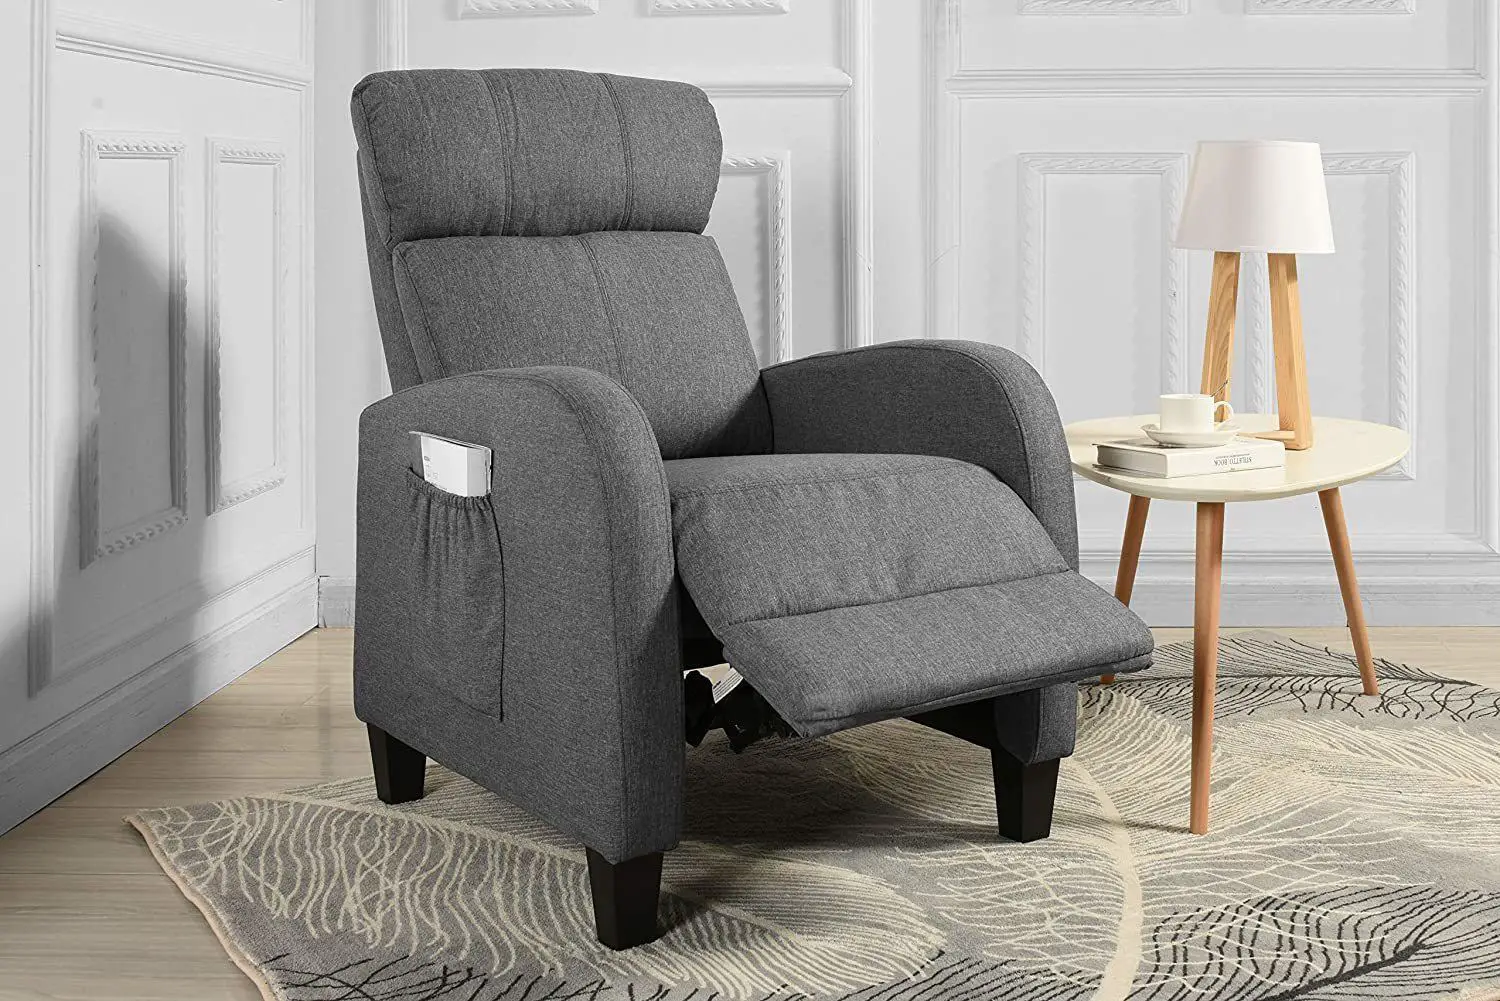 Best Living Room Chair For Tall Person